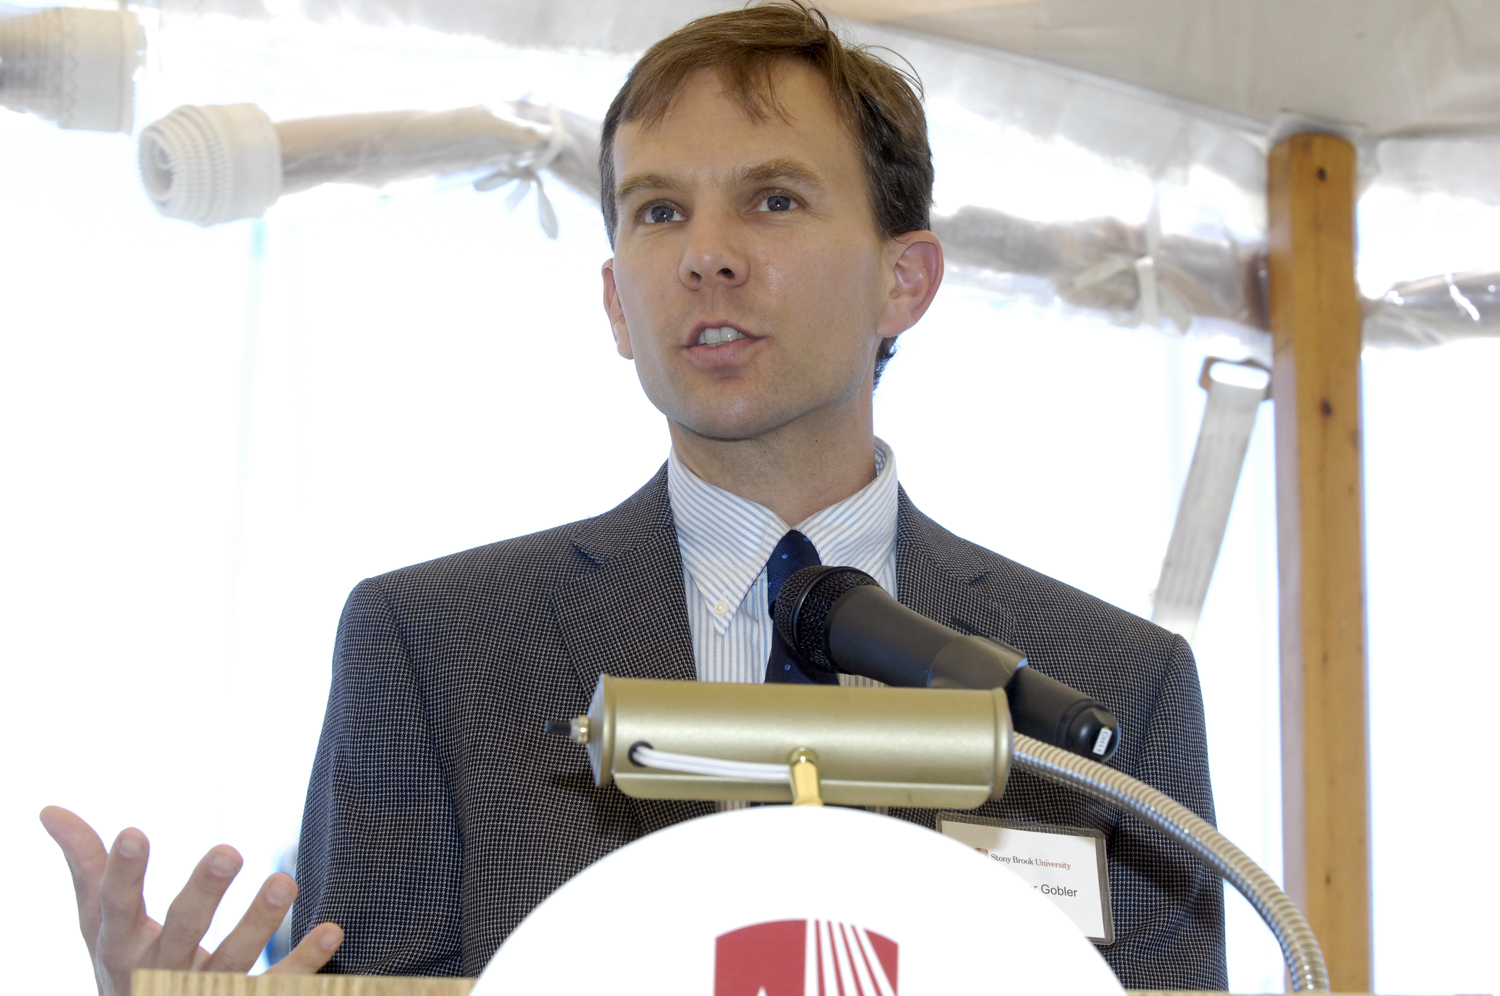 Dr. Christopher Gobler at the ground breaking in May of 2012 for the  $8.3 million new Marine Science facility on Fort Pond Bay,   DANA SHAW